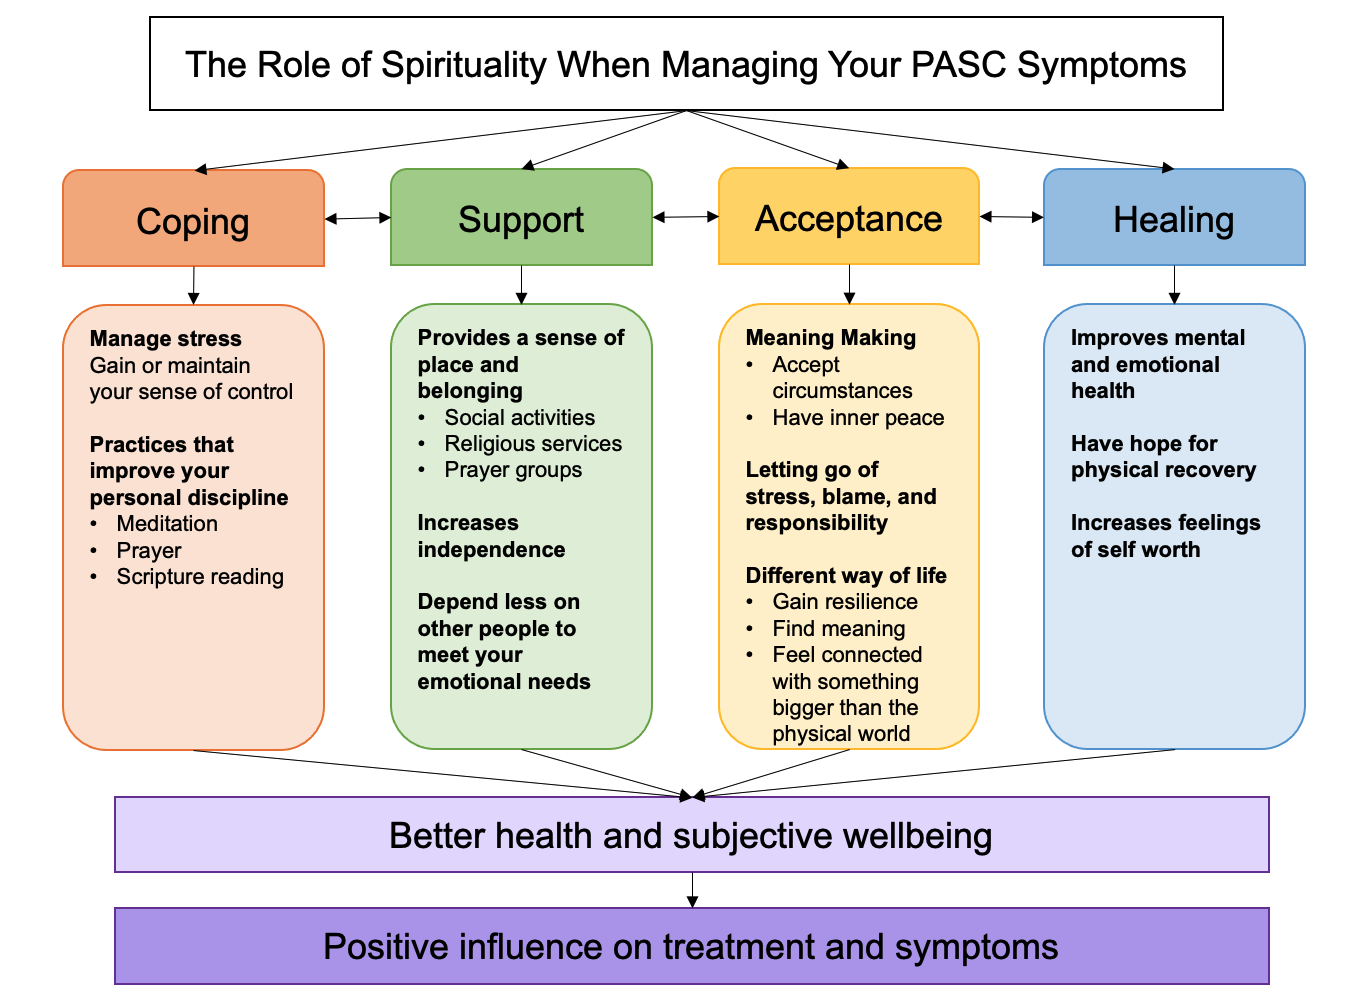 A diagram showing how the role of spirituality when managing your lupus symptoms through coping, support, acceptance, and healing aspects that lead to better health and wellbeing and a positive influence on treatment and symptoms